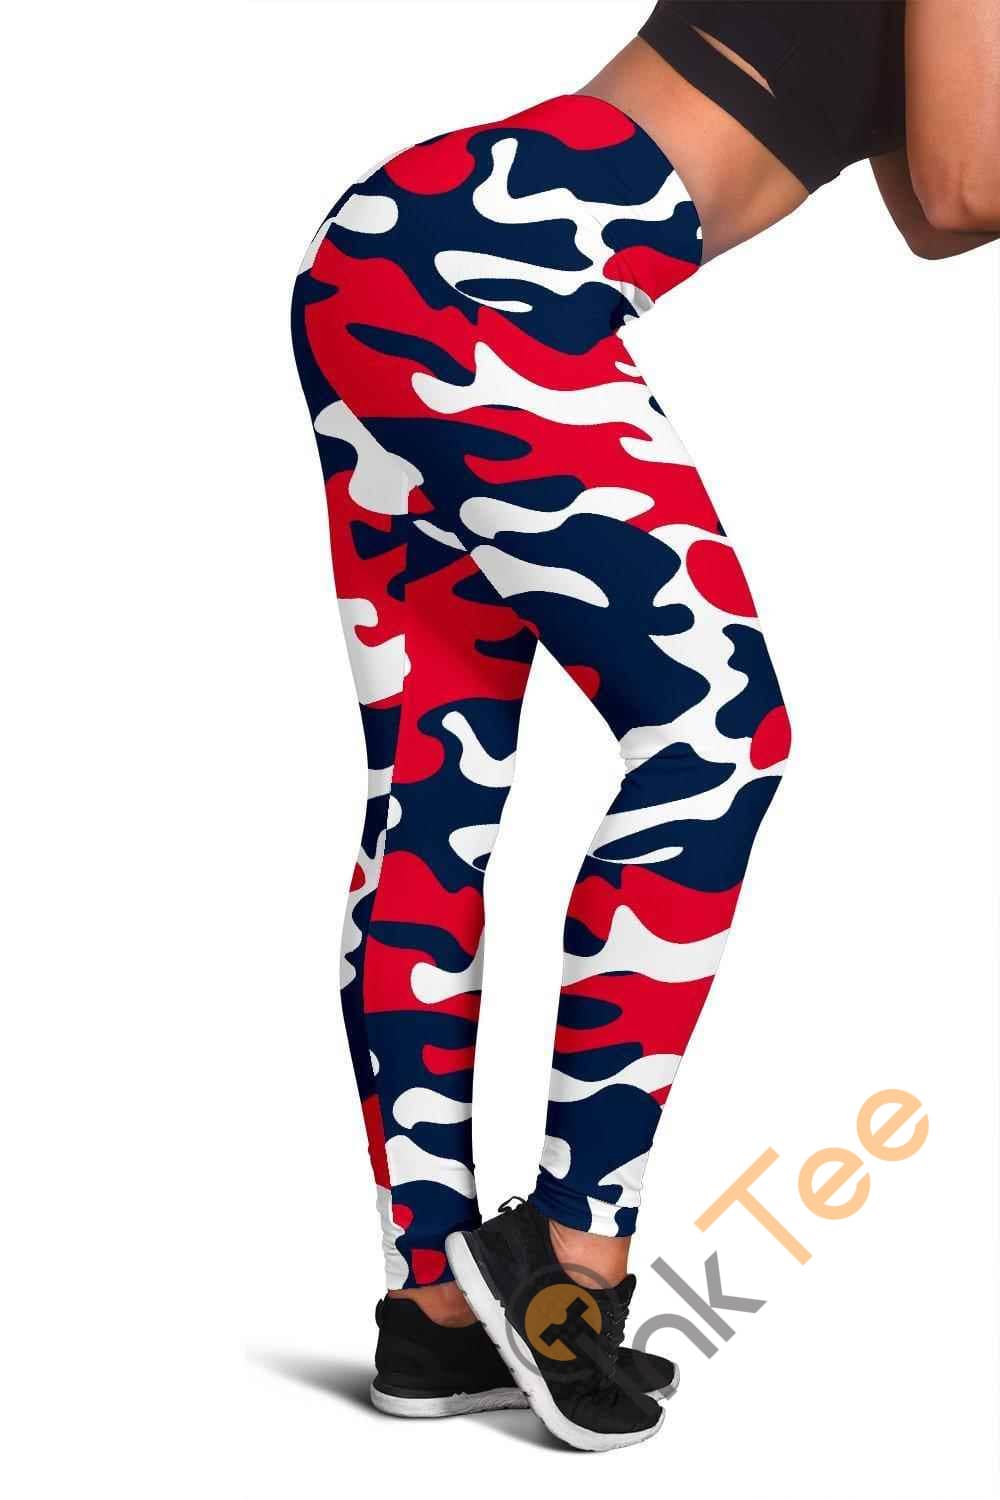 Inktee Store - New England Patriots Inspired Tru Camo 3D All Over Print For Yoga Fitness Fashion Women'S Leggings Image